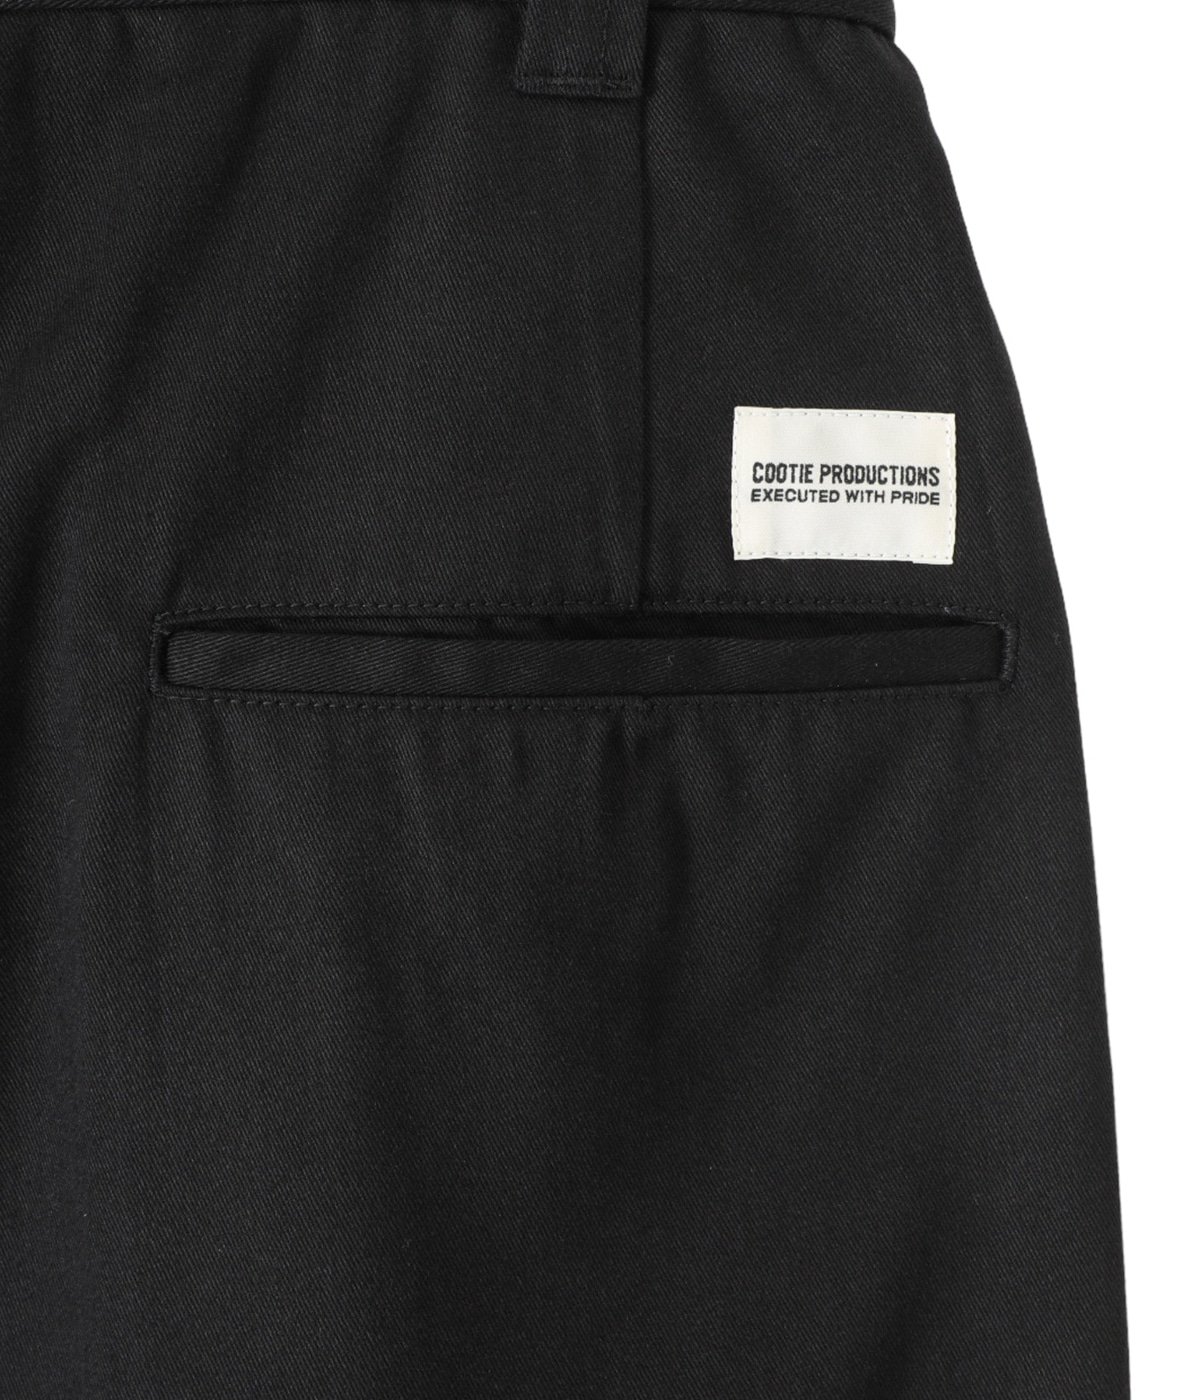 C/R Twill Raza 1Tuck Trousers | COOTIE PRODUCTIONS(クーティー